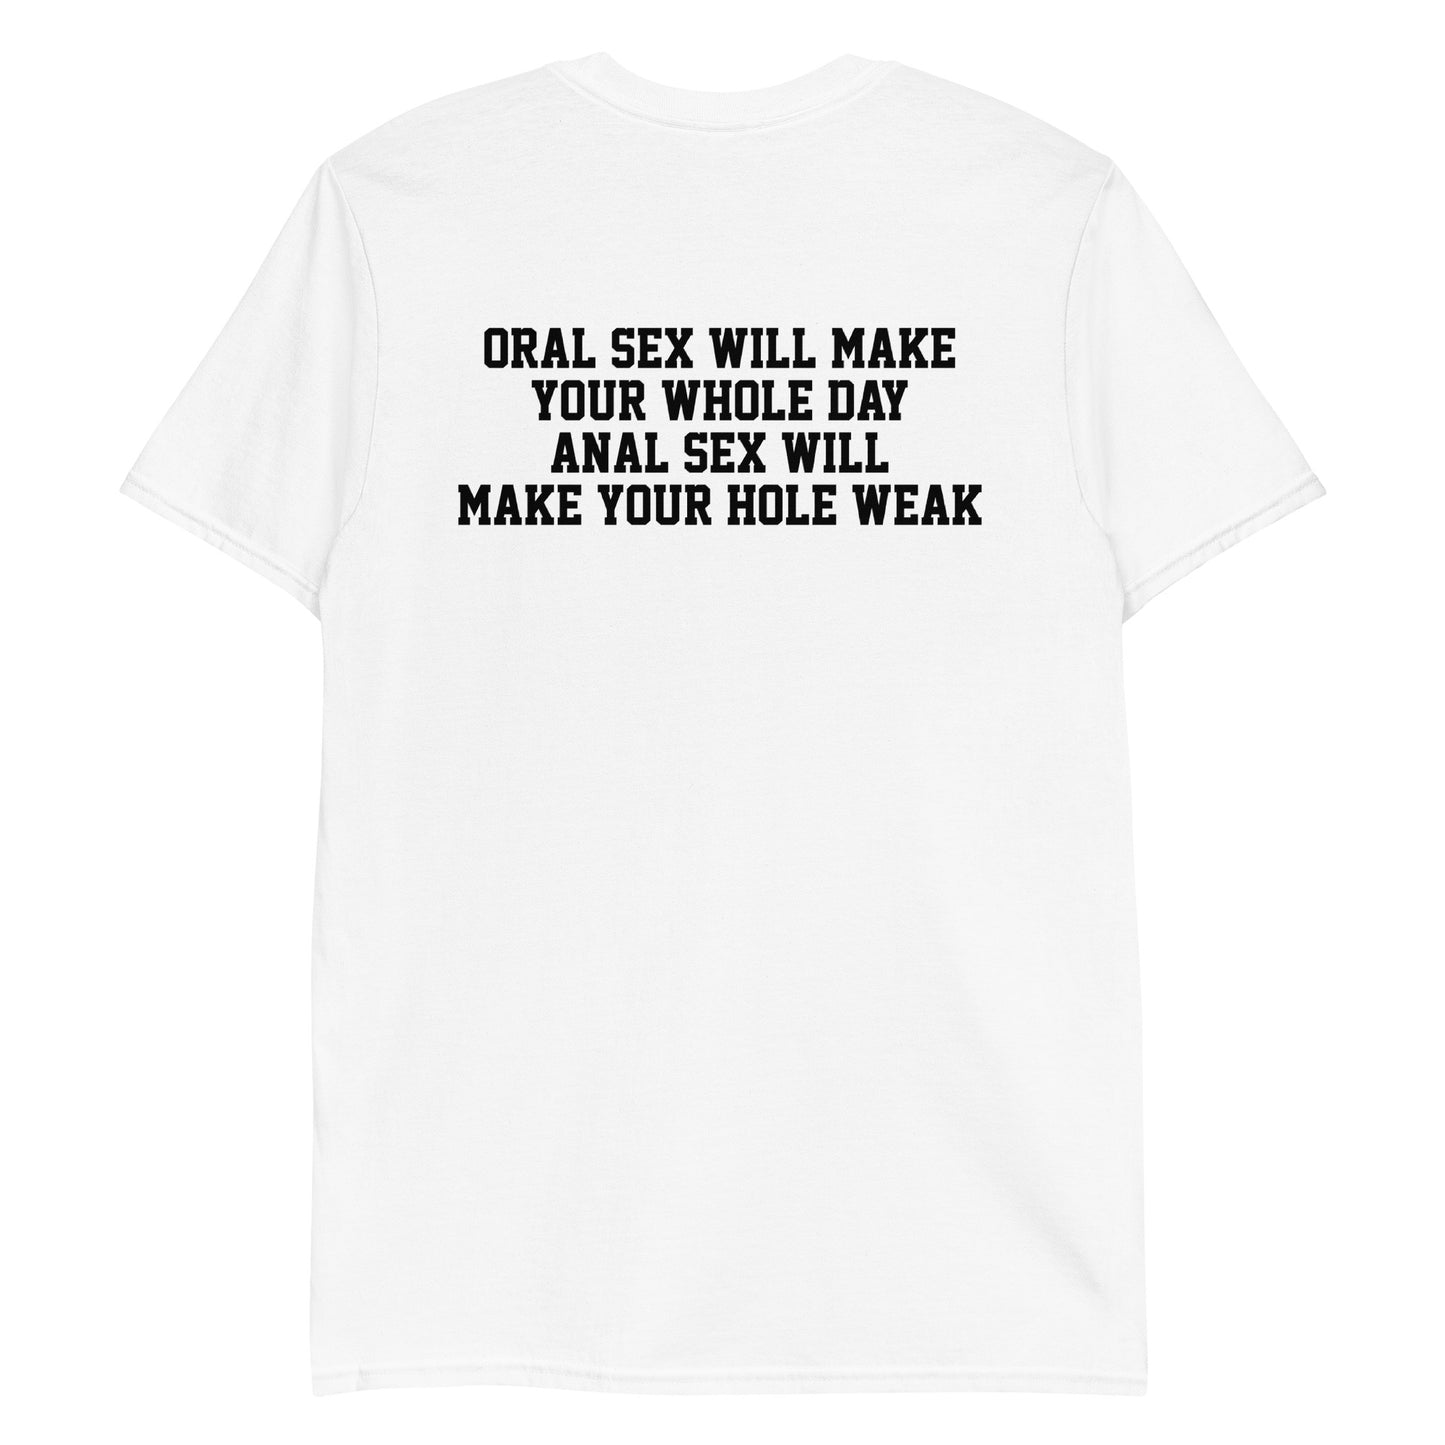 Oral sex will make your whole day, anal sex will make your hole weak.